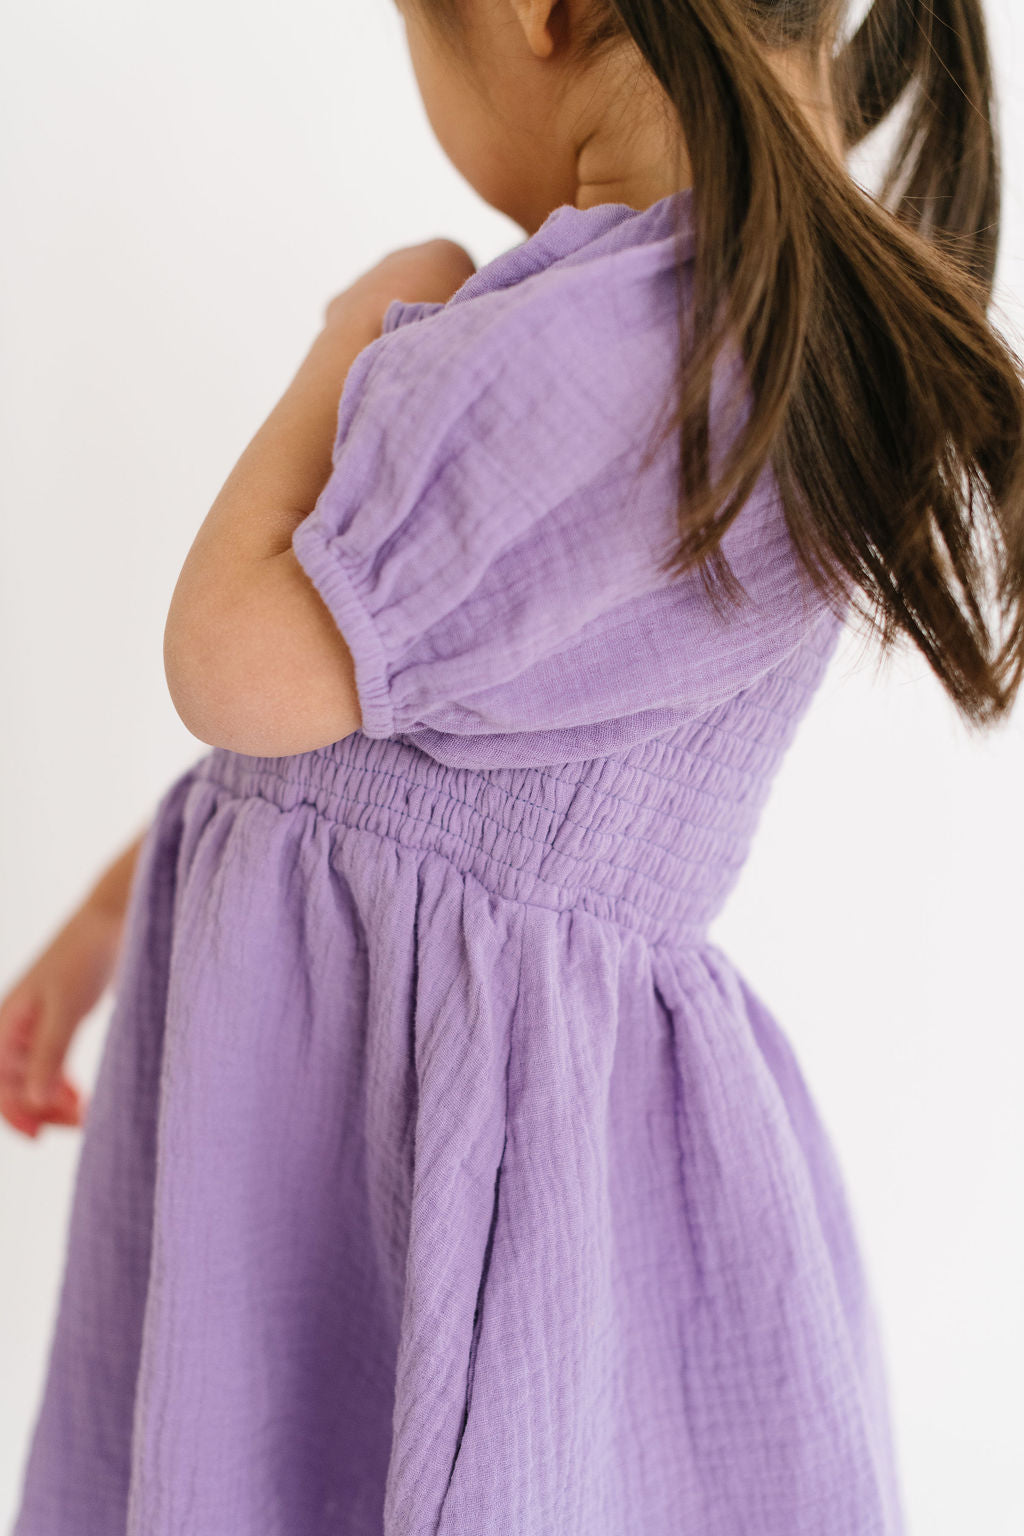 Short Puff Sleeve Smocked Twirly Dress in Lavender